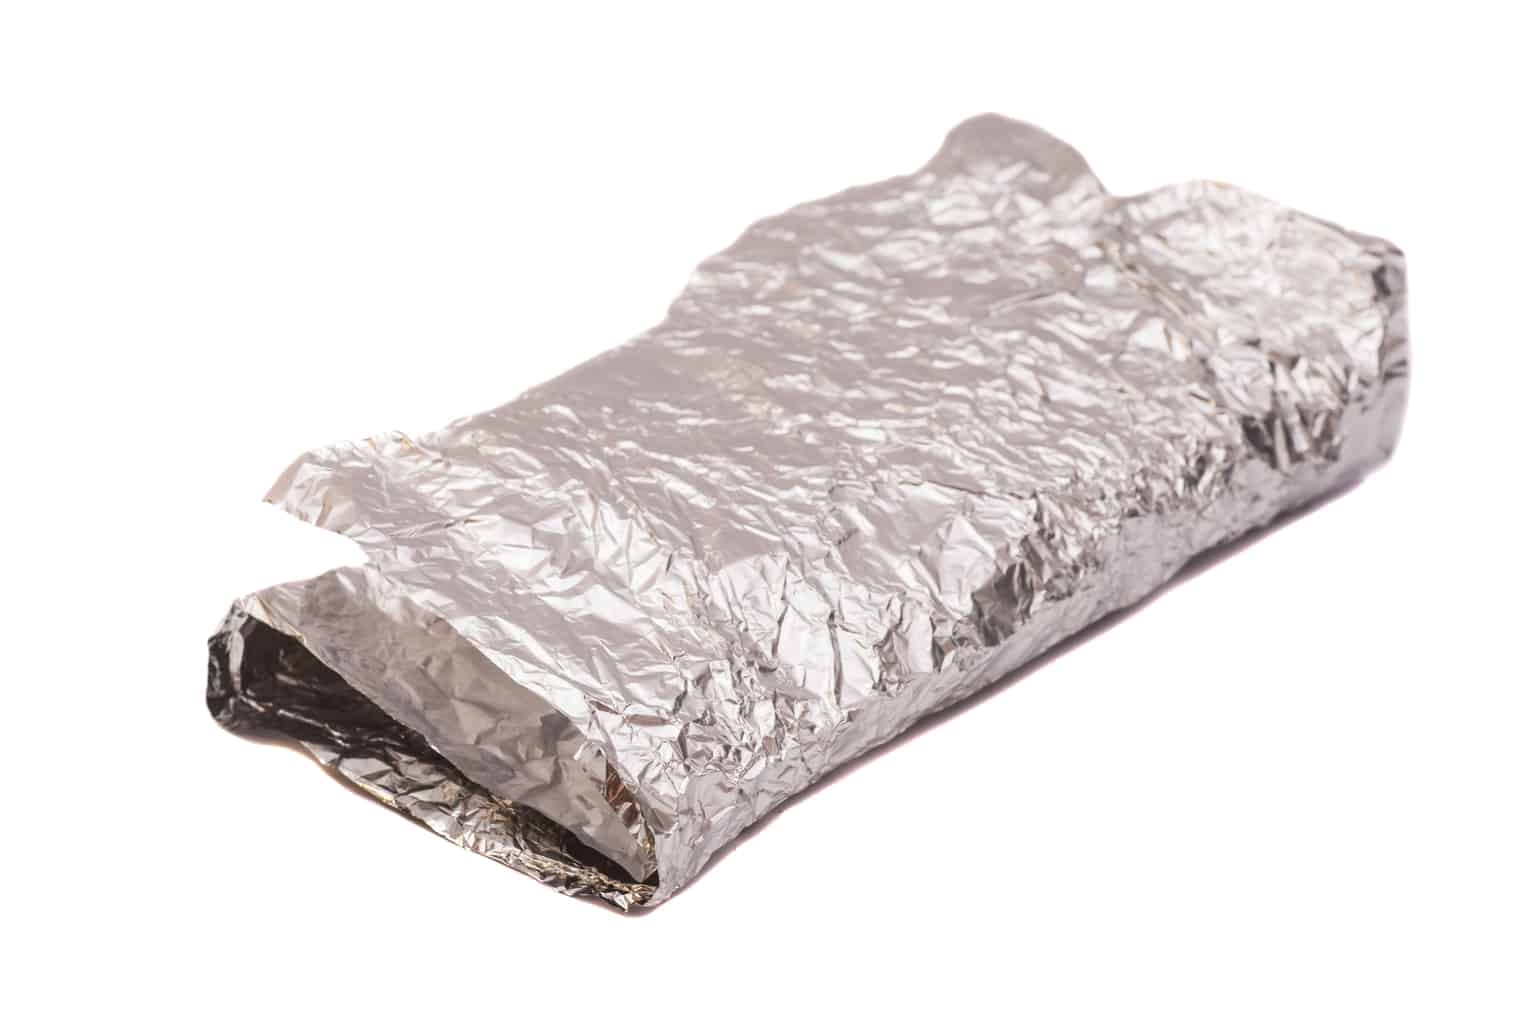 Doctors Warn: If you use aluminum foil, stop it or face deadly consequences